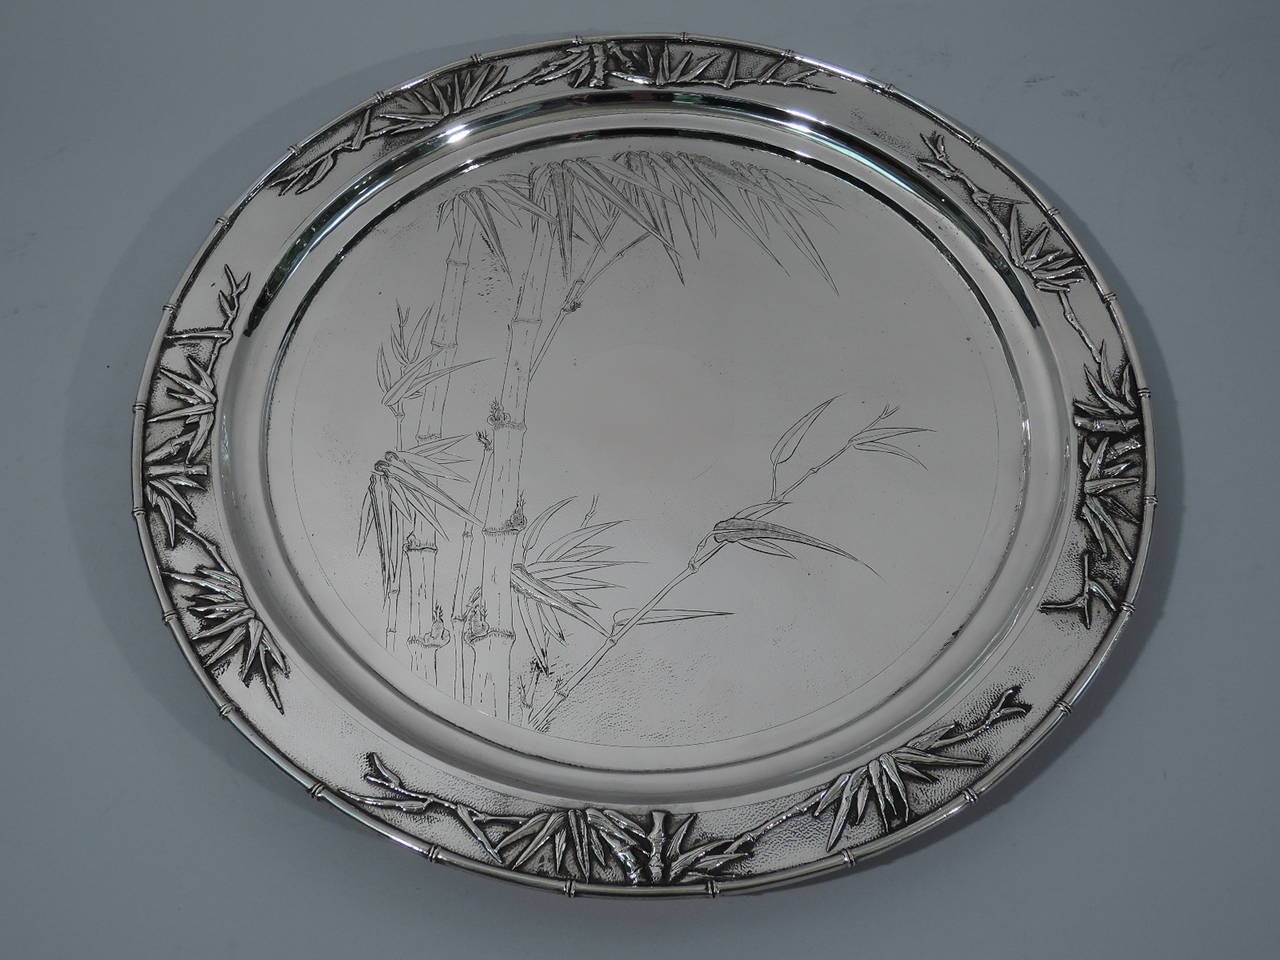 Export silver bamboo tray. Made by Zee Wo in Shanghai, circa 1900. Circular with three half sphere supports. Well has engraved bamboo and central circular cartouche. Rim is bamboo with applied leaves. All-over stippling. A beautiful piece for